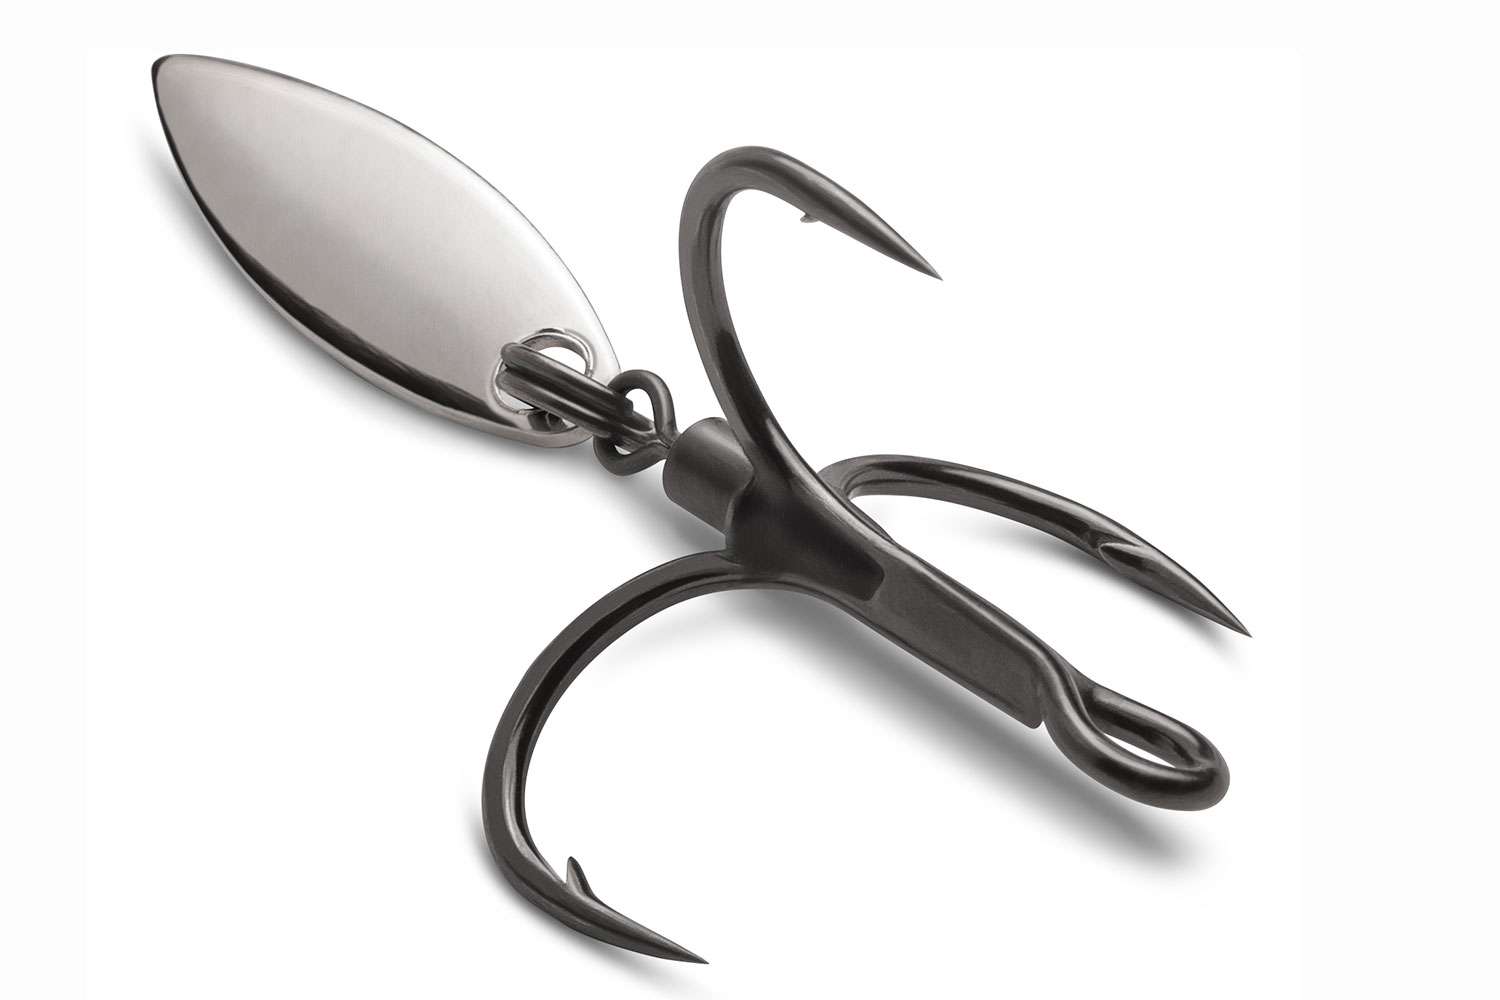 <p><b>VMC Bladed Hybrid Treble</b></p>
Tweak and upgrade any and every lure that uses treble hooks. The Bladed Hybrid Treble has a resin sealed swivel and blade for maximum rotation and flash. The new VMC 7548 Bladed Hybrid treble hook, features a premium quality small Willow blade. The Blade is connected to the base of the treble by a swivel ensuring a smooth 360-degree rotation. It is available in four sizes Nos. 2, 4, 6 and 8 in black nickel plating.<br>
<p><b>MSRP: $5.99</b></p>
<a href=